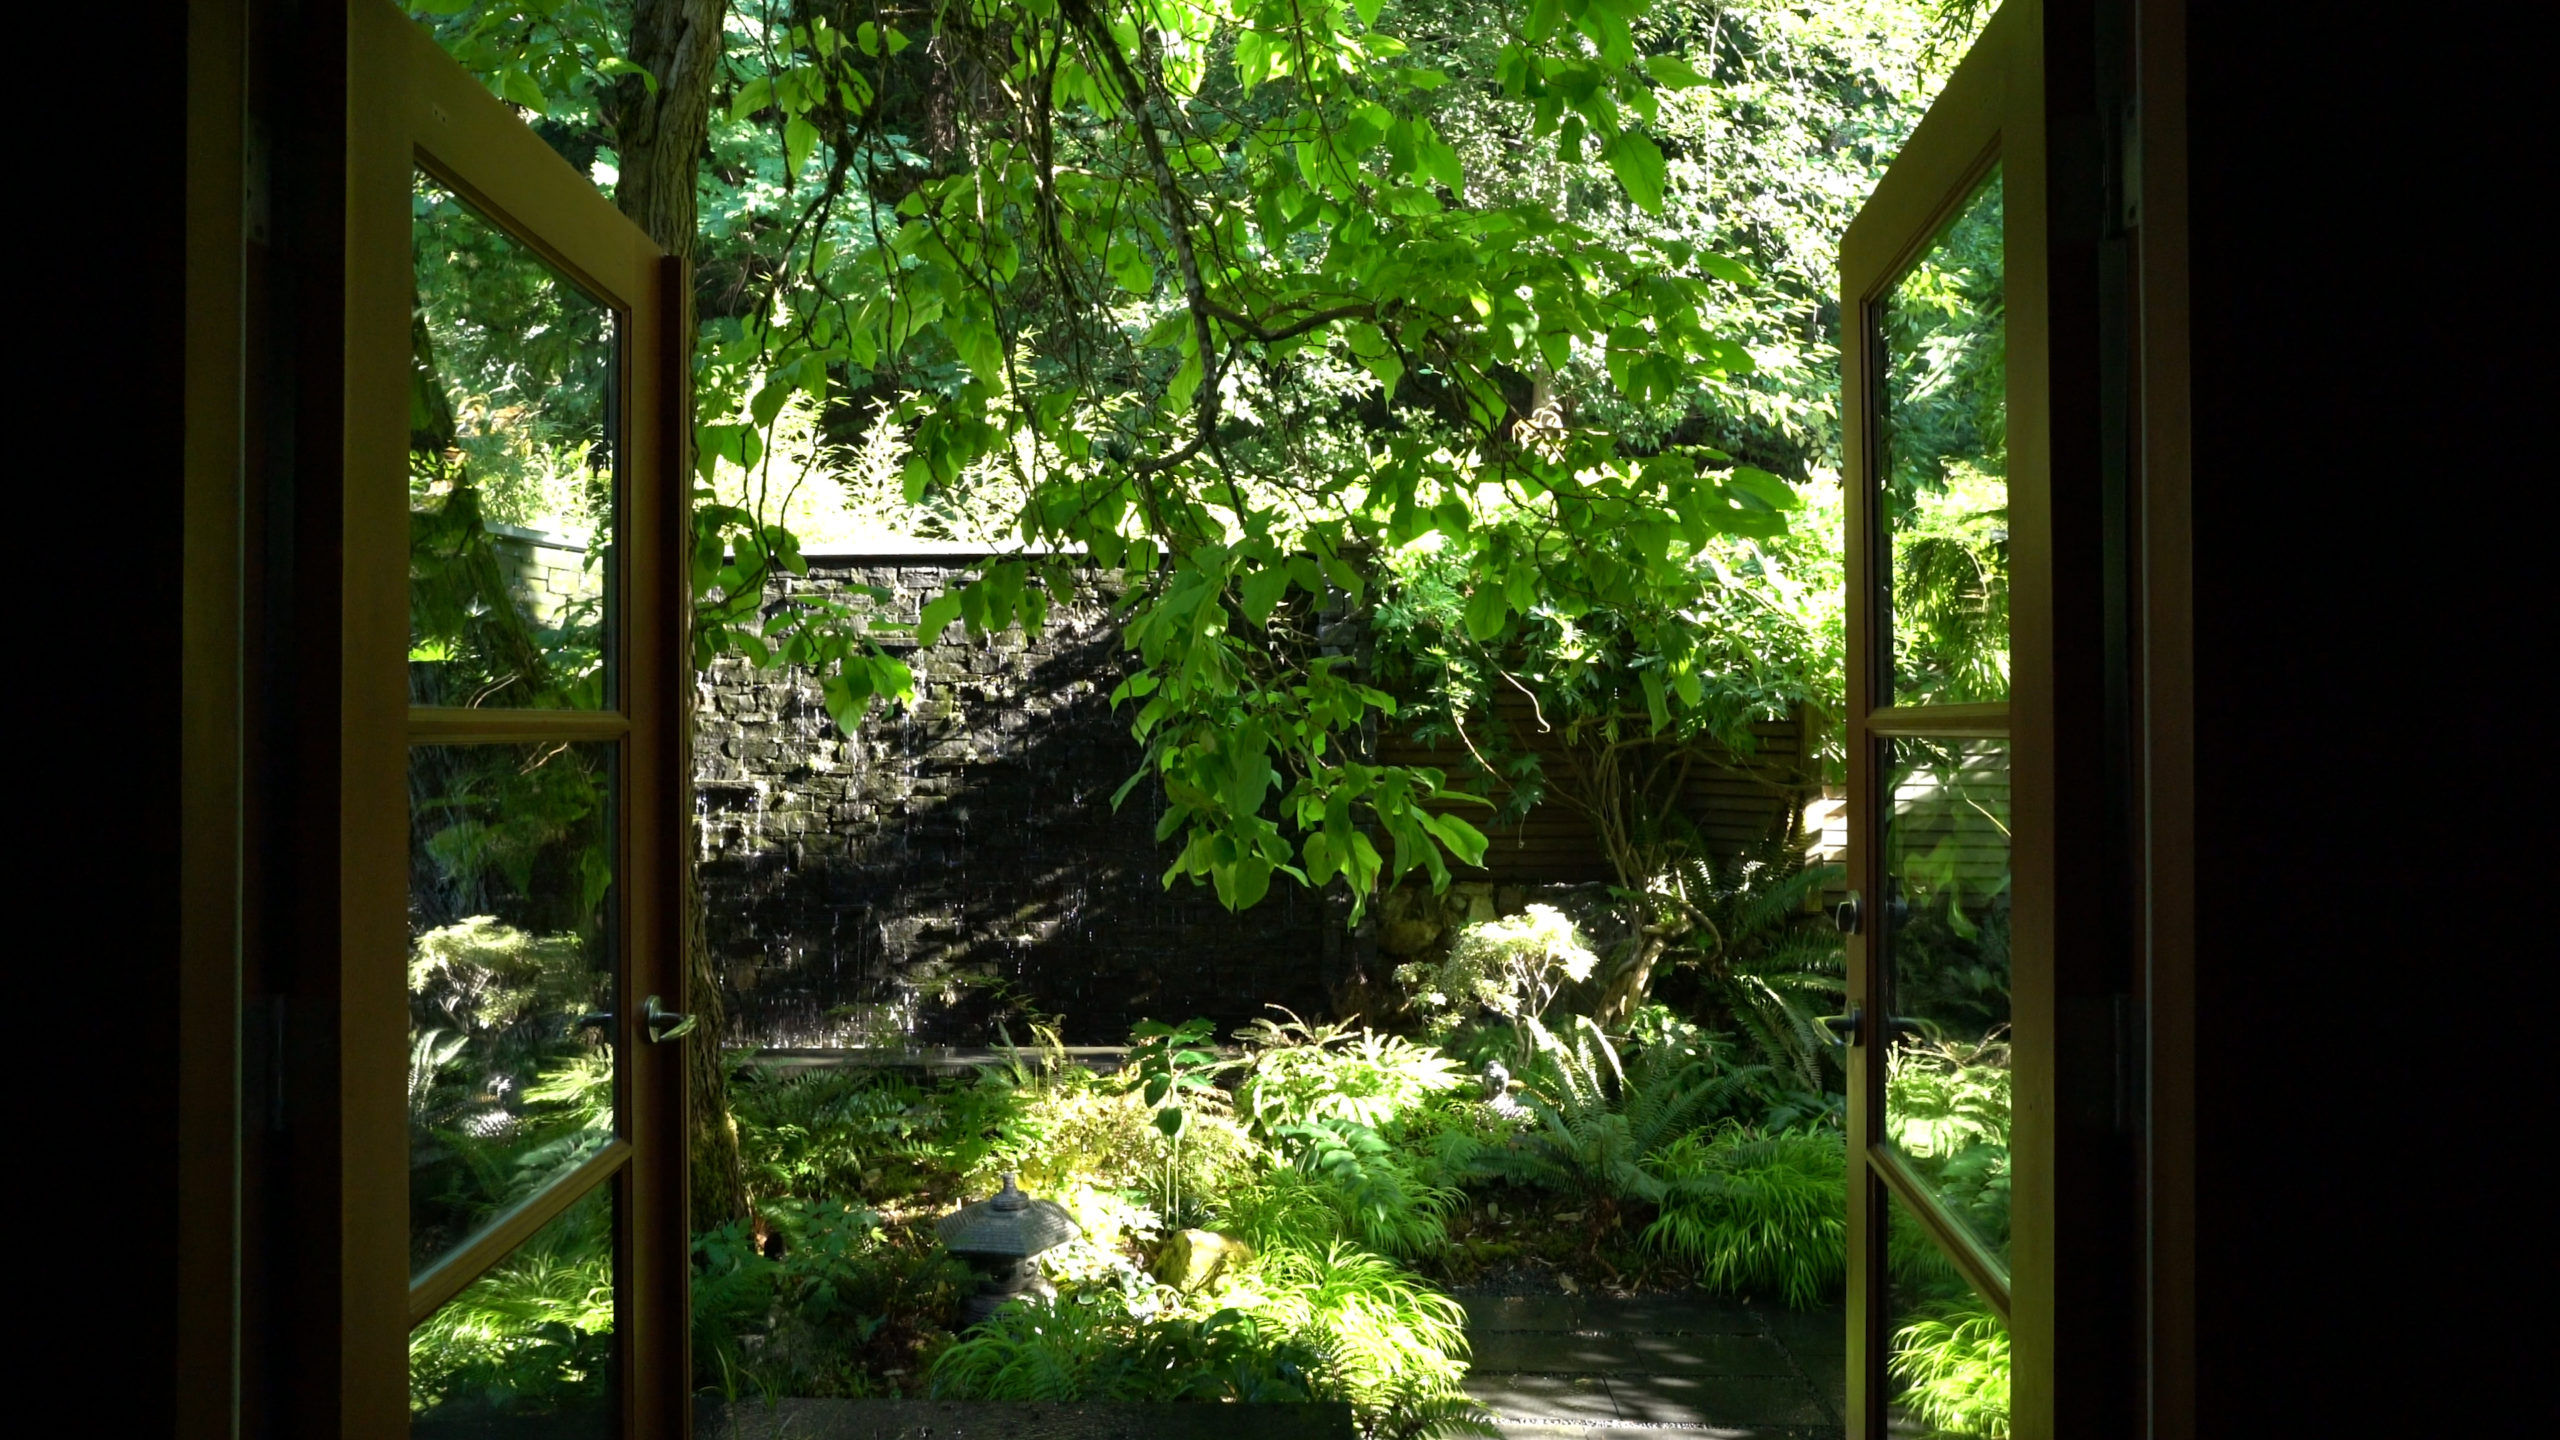 Yard design with cascading waterfall and green plants at a custom home on Bowen Island.